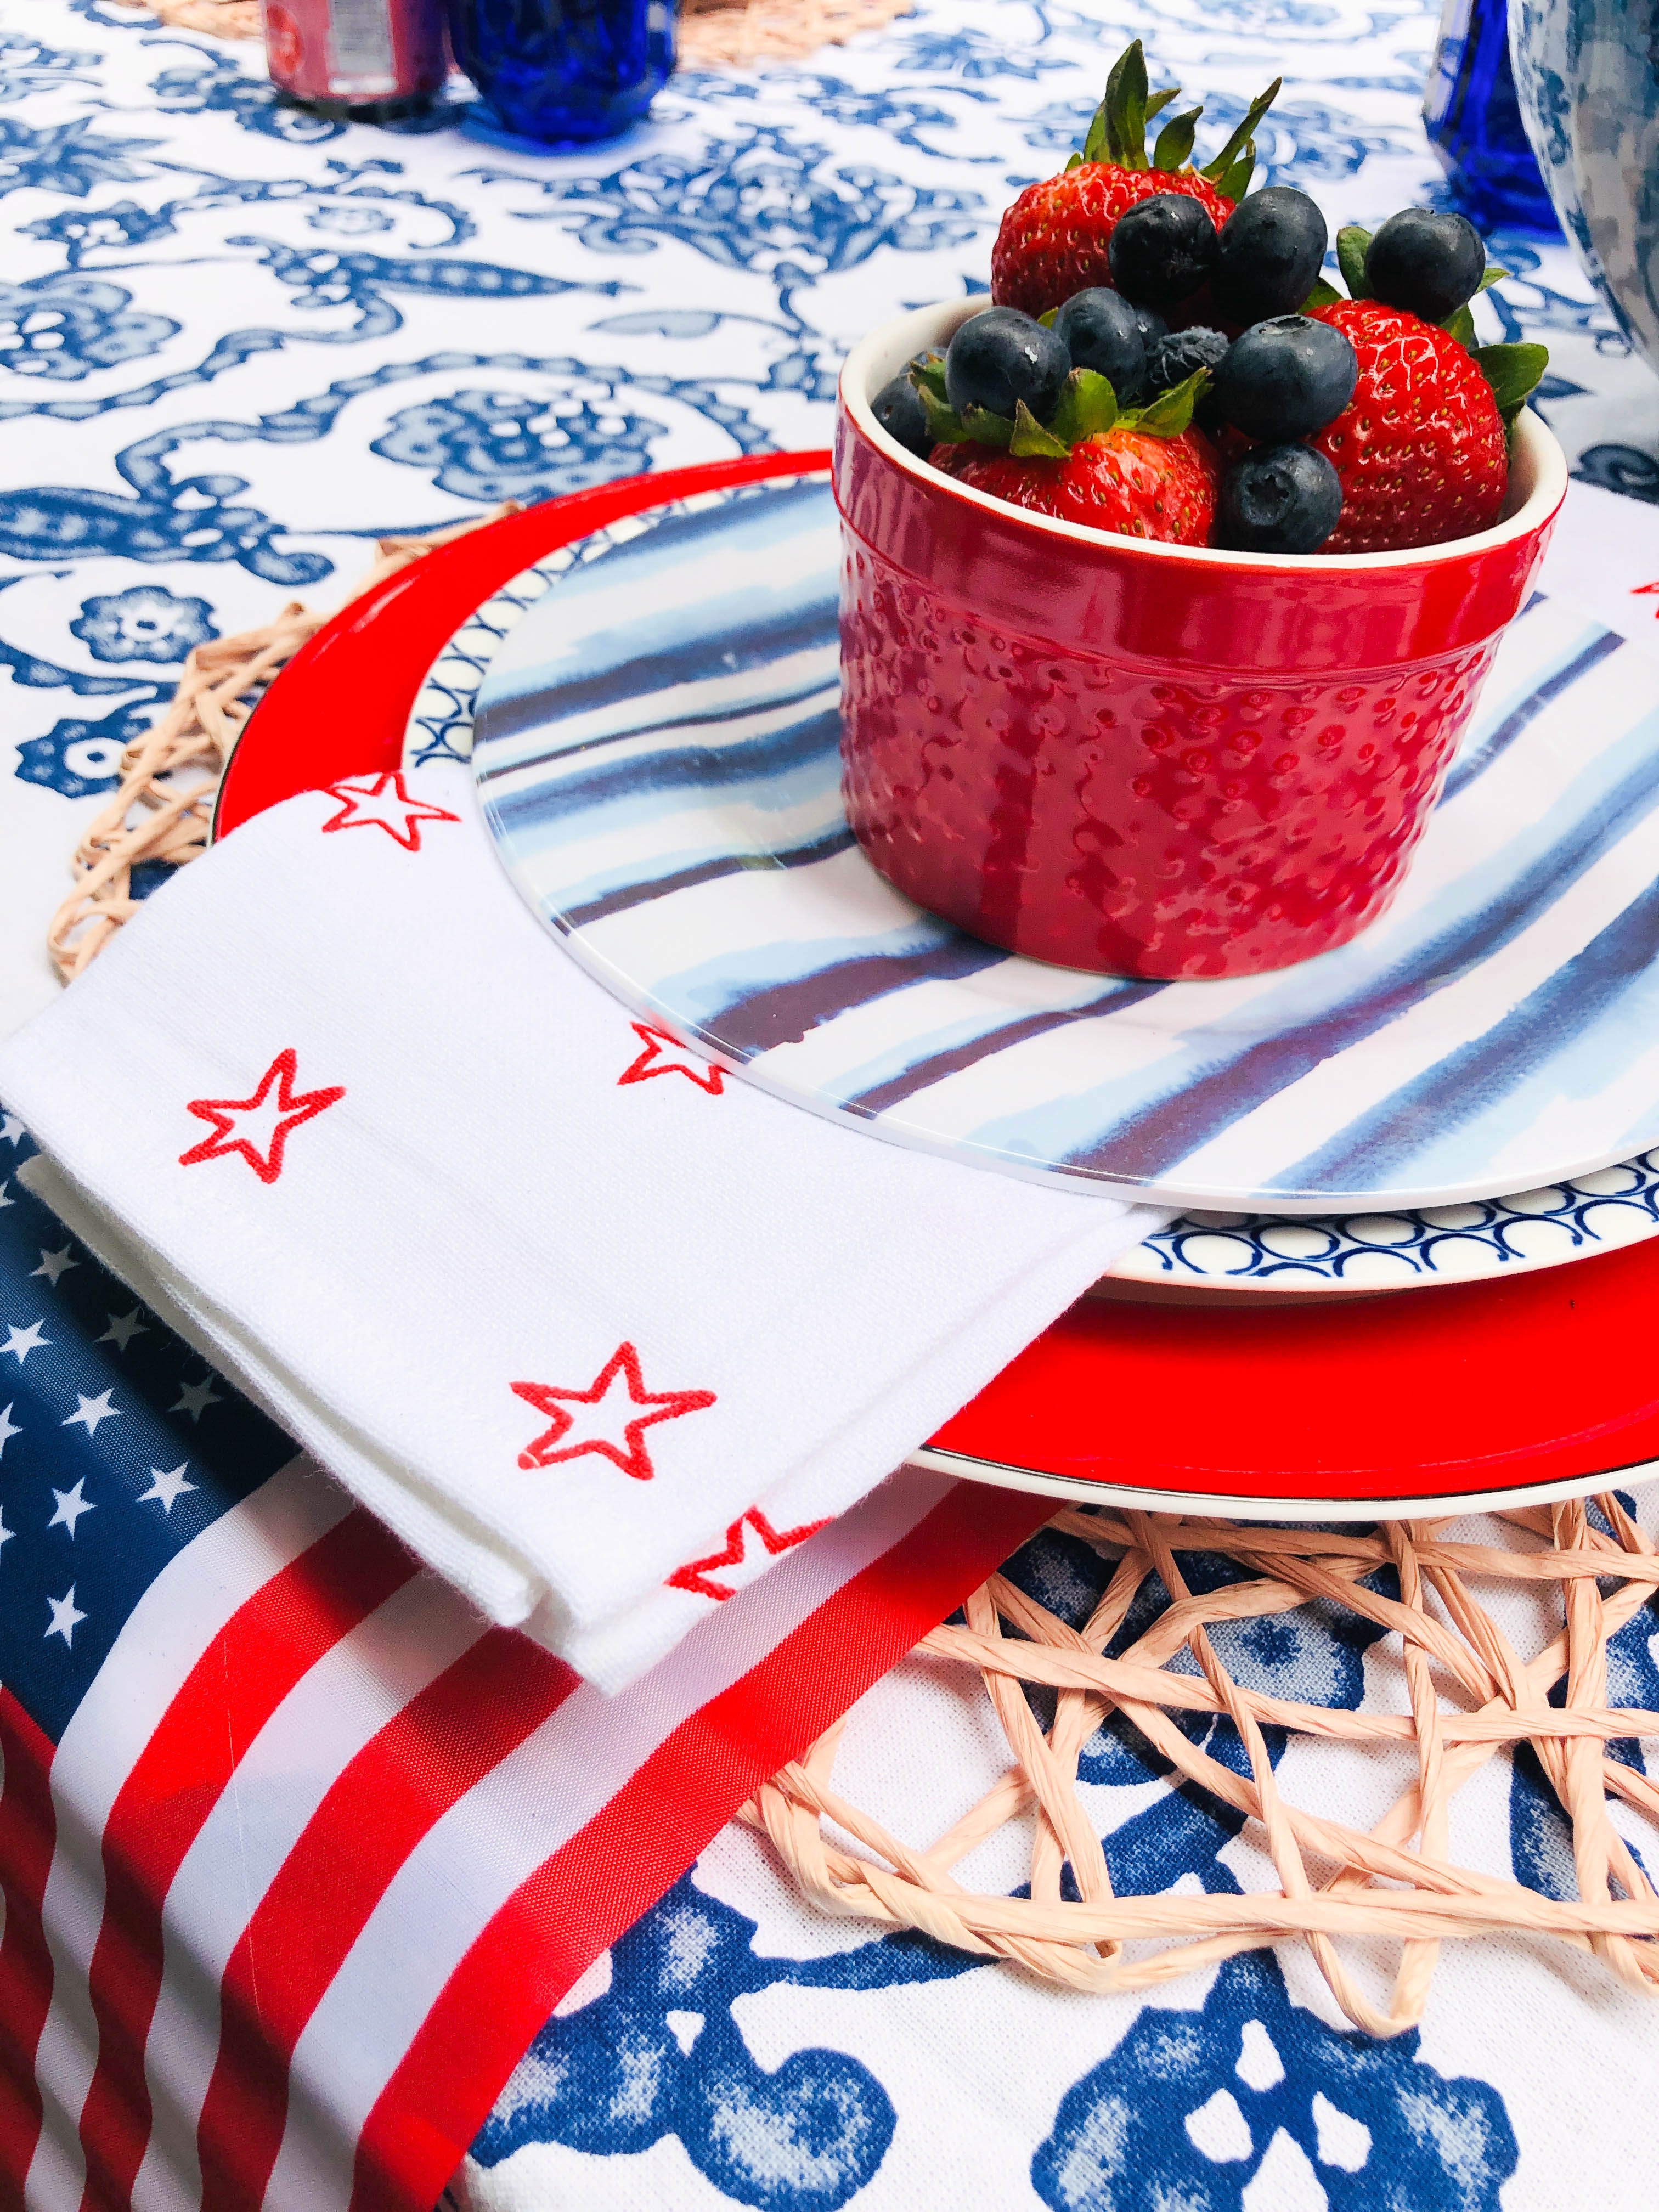 The Memorial Day Table setting with three stacked plates on top of a woven placemat.